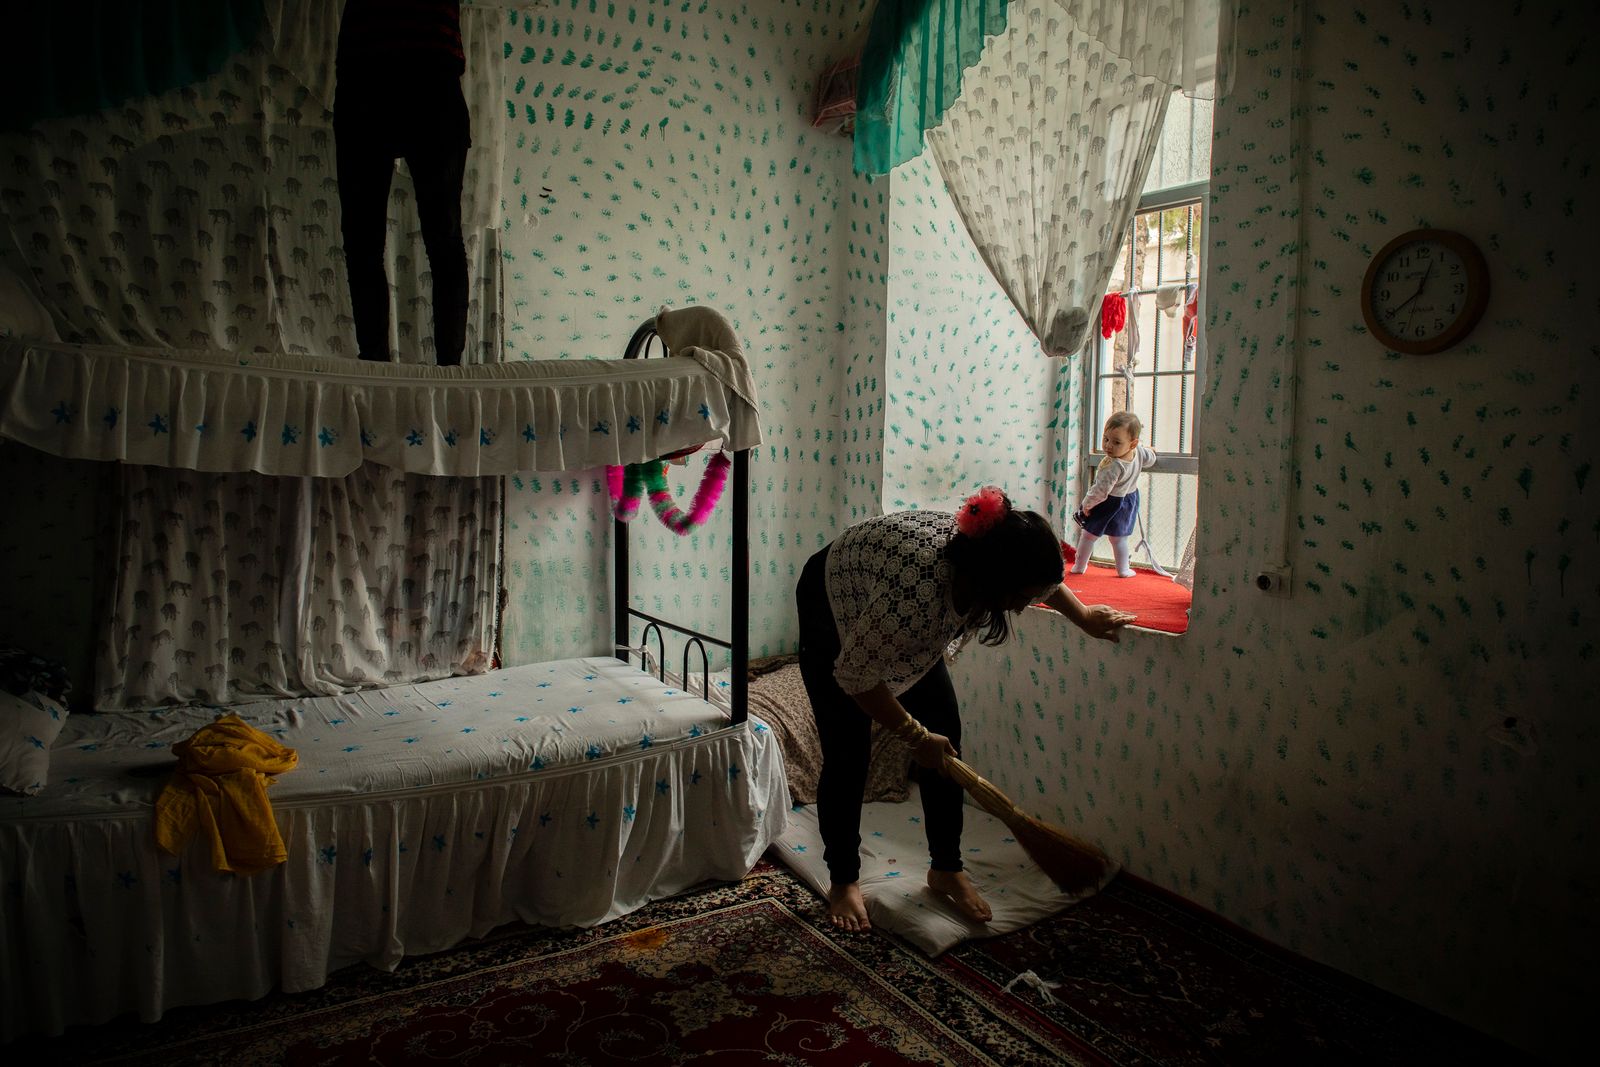 © Kiana Hayeri - Image from the They Killed Their Husbands. Now in Prison, They Feel Free. photography project